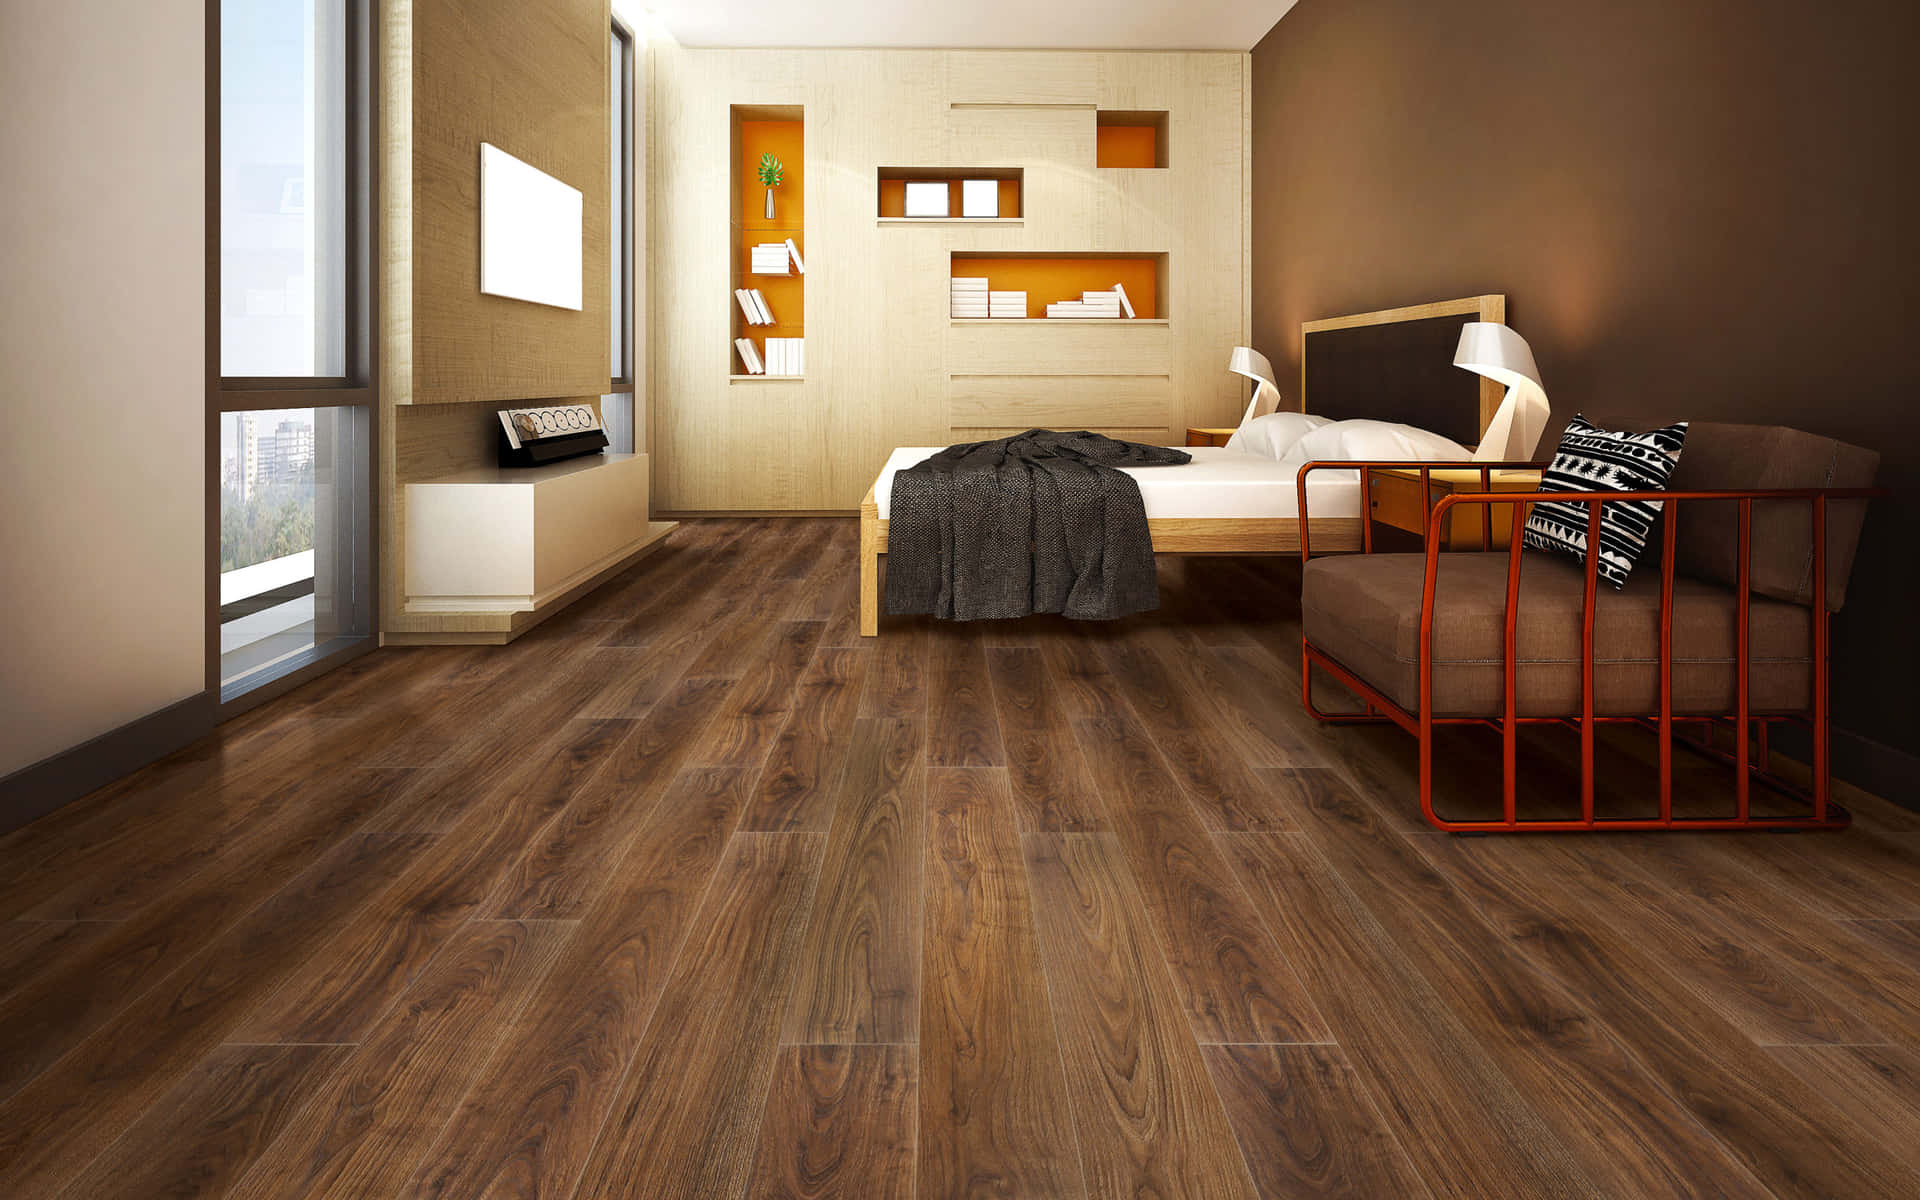 Hardwood flooring adds living space warmth and timeless beauty to your home